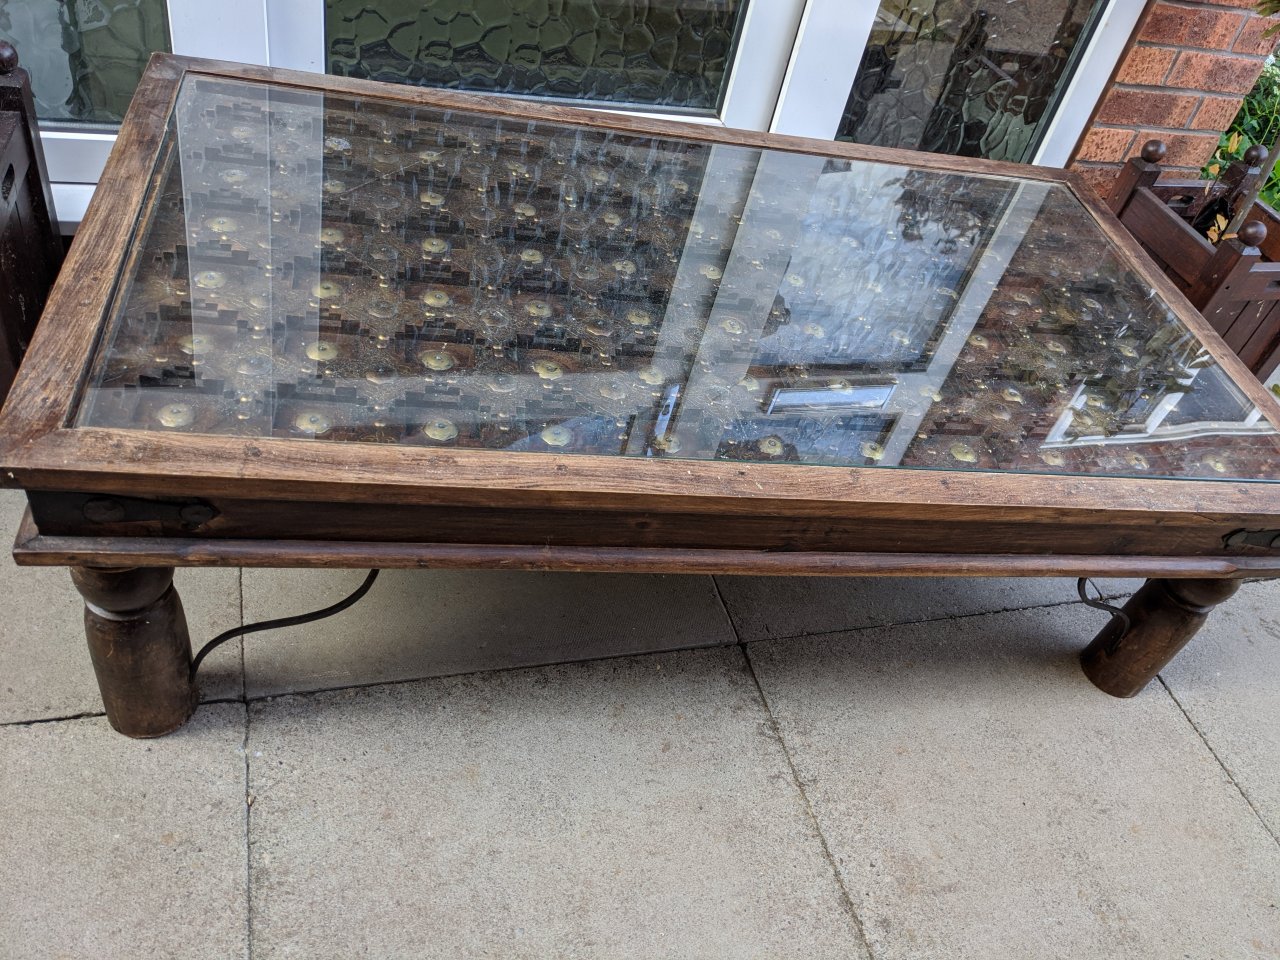 Arab Door Coffee Table - Worth Much? | My Antique Furniture Collection